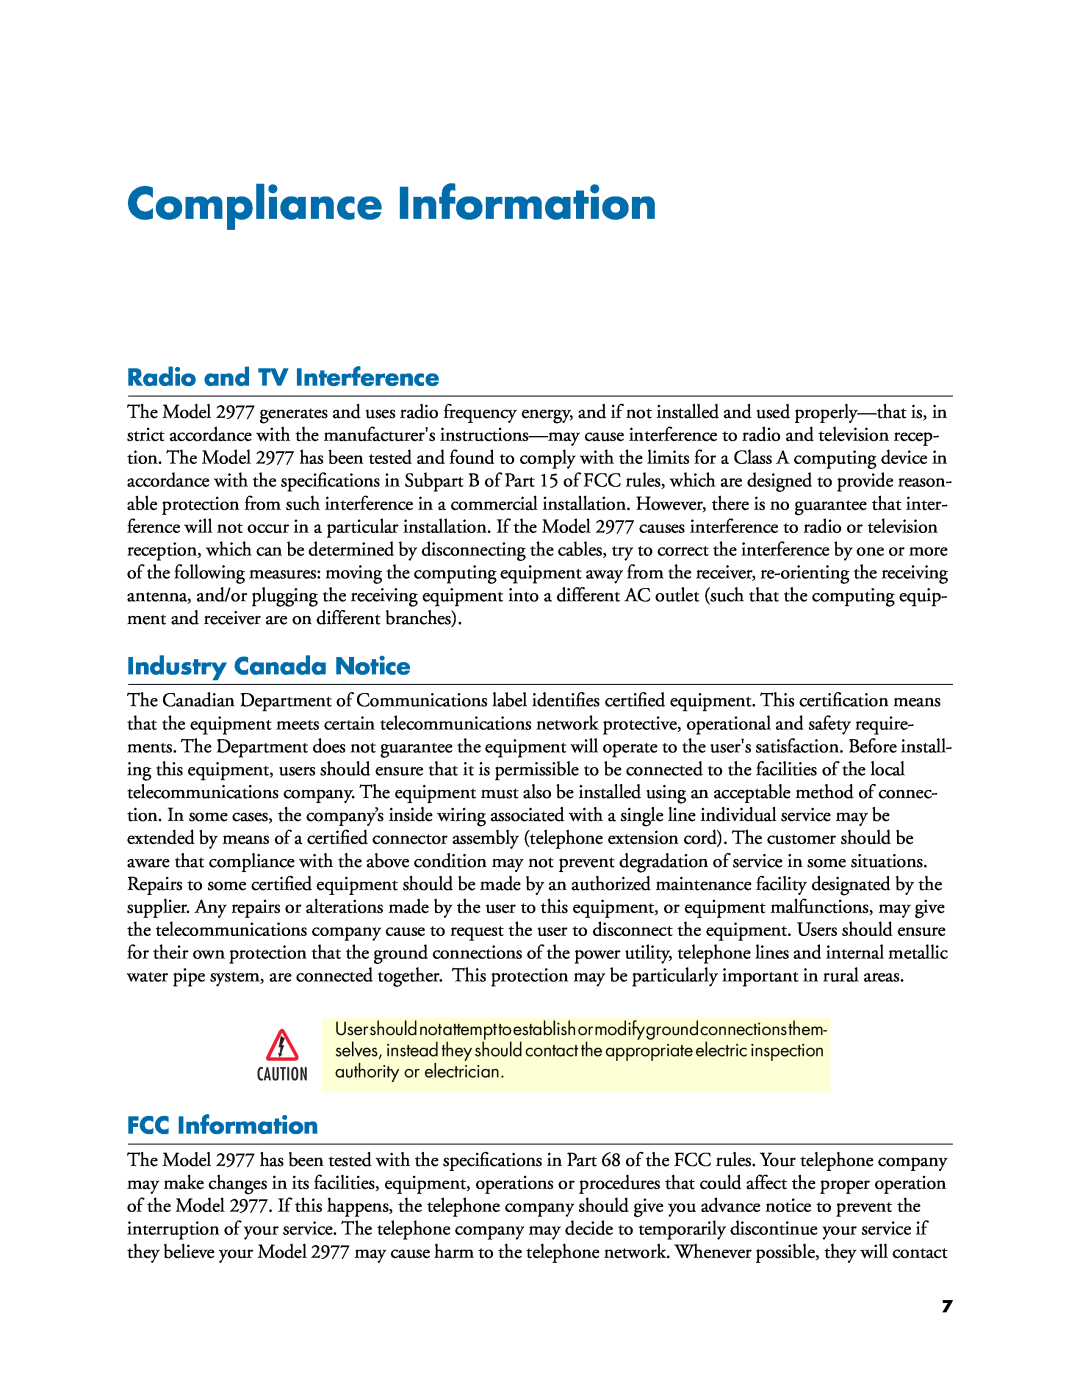 Patton electronic 2977 manual Compliance Information, Radio and TV Interference, Industry Canada Notice, FCC Information 